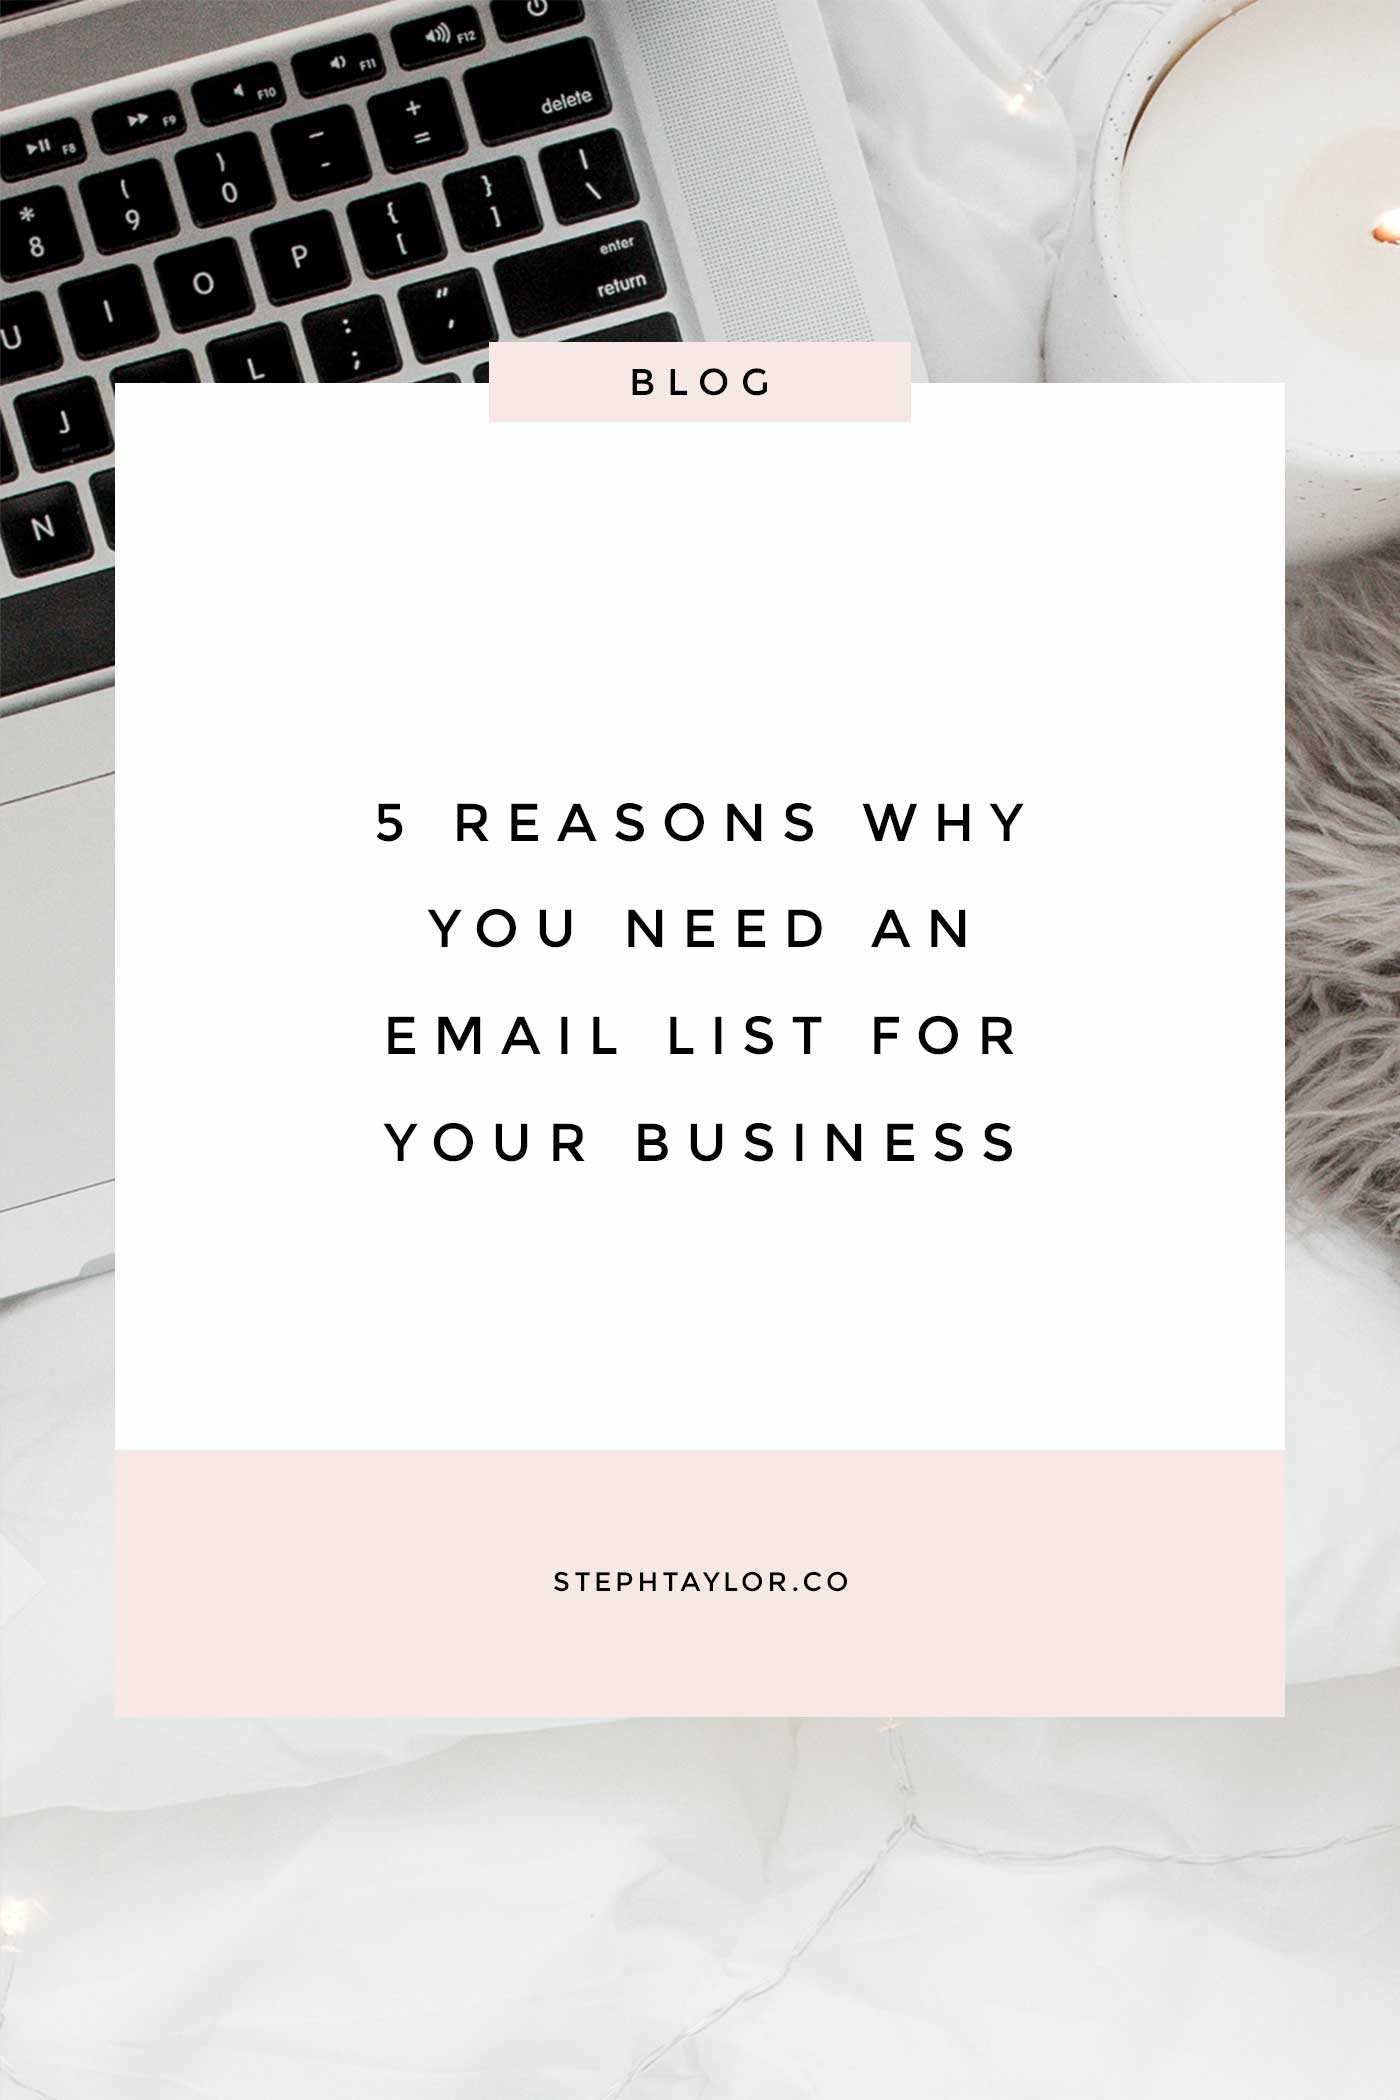 Why you need an email list for your business